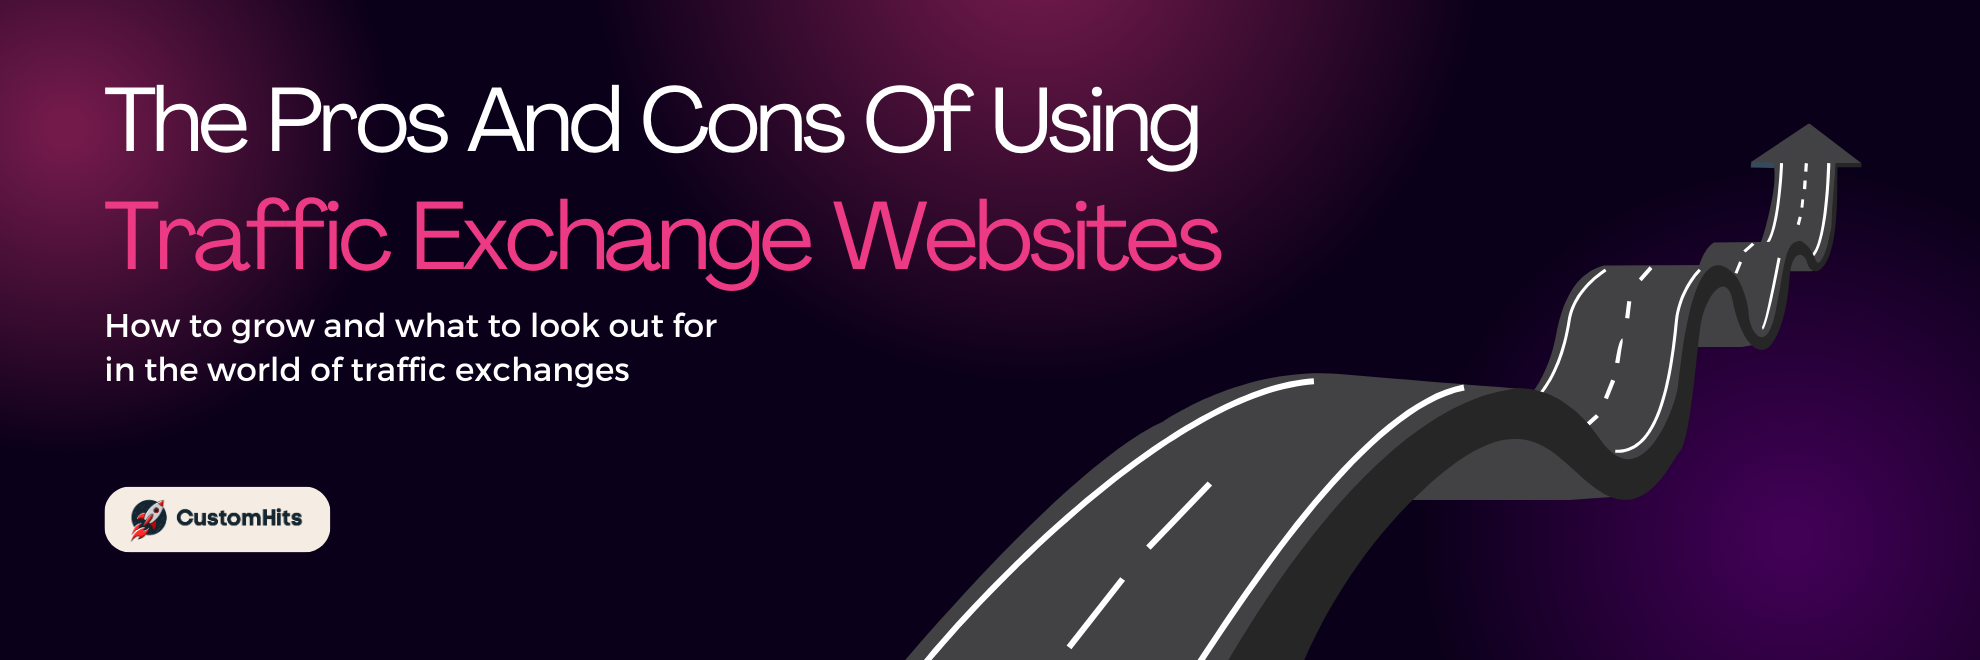 The Pros And Cons Of Using Traffic Exchange Websites